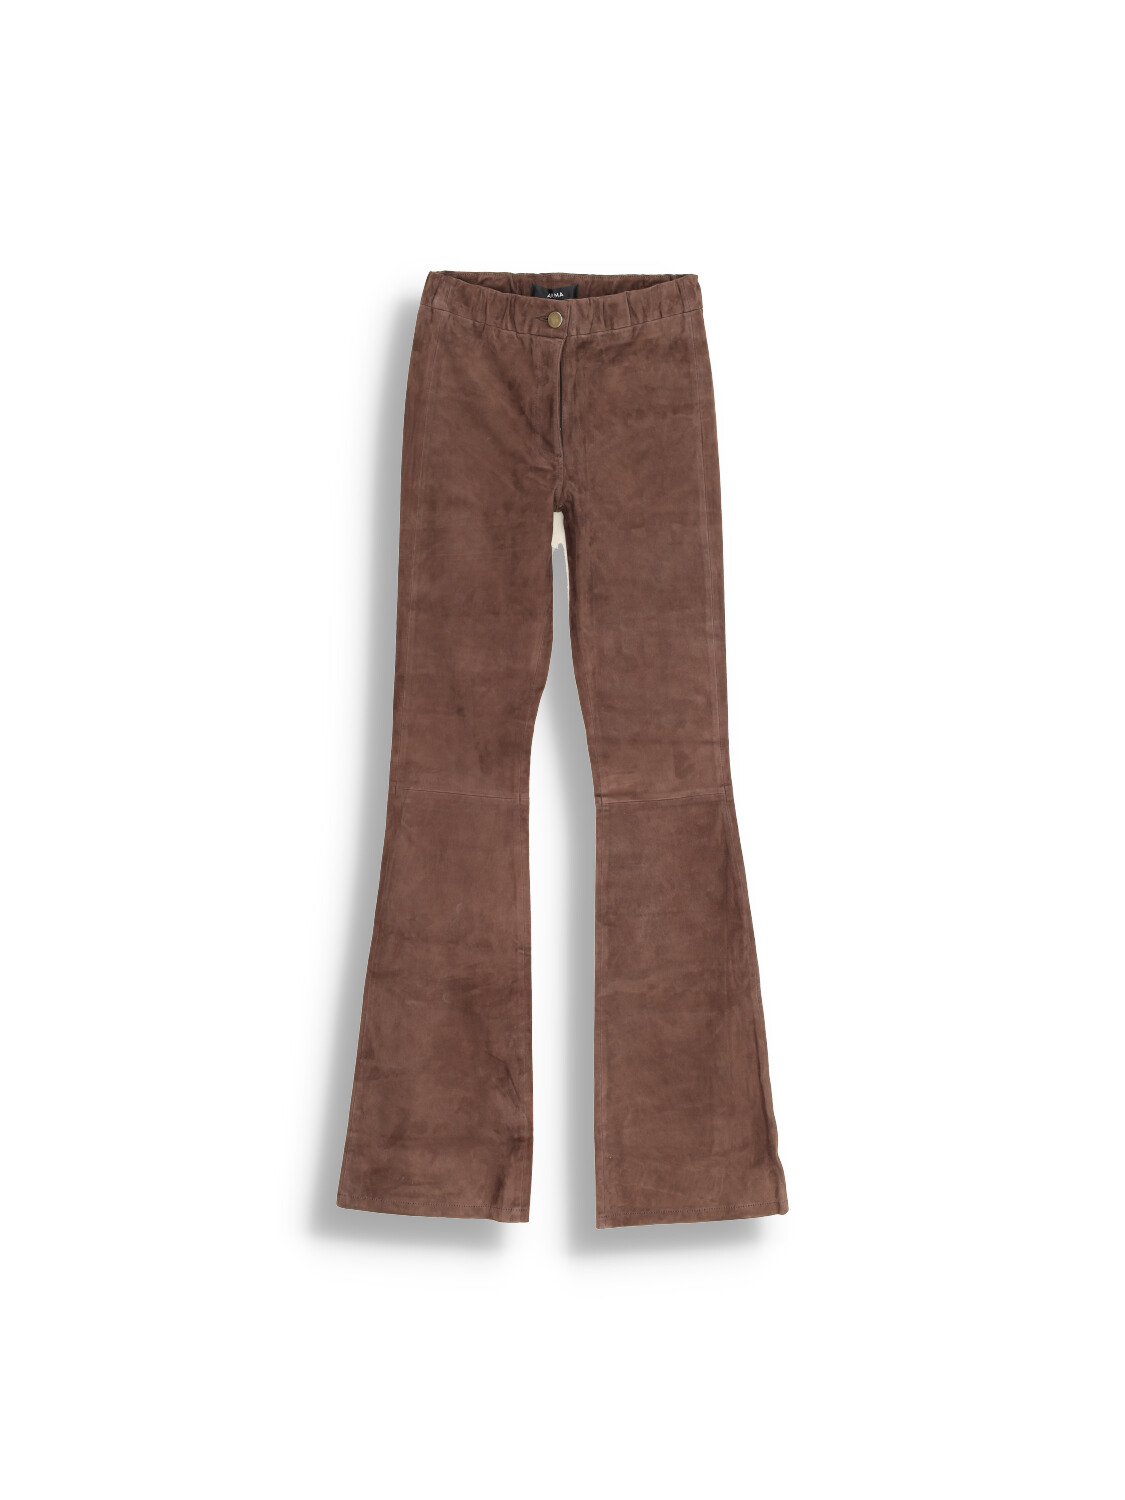 Arma Izzy - Pants with elastic waistband in lamb leather brown 34